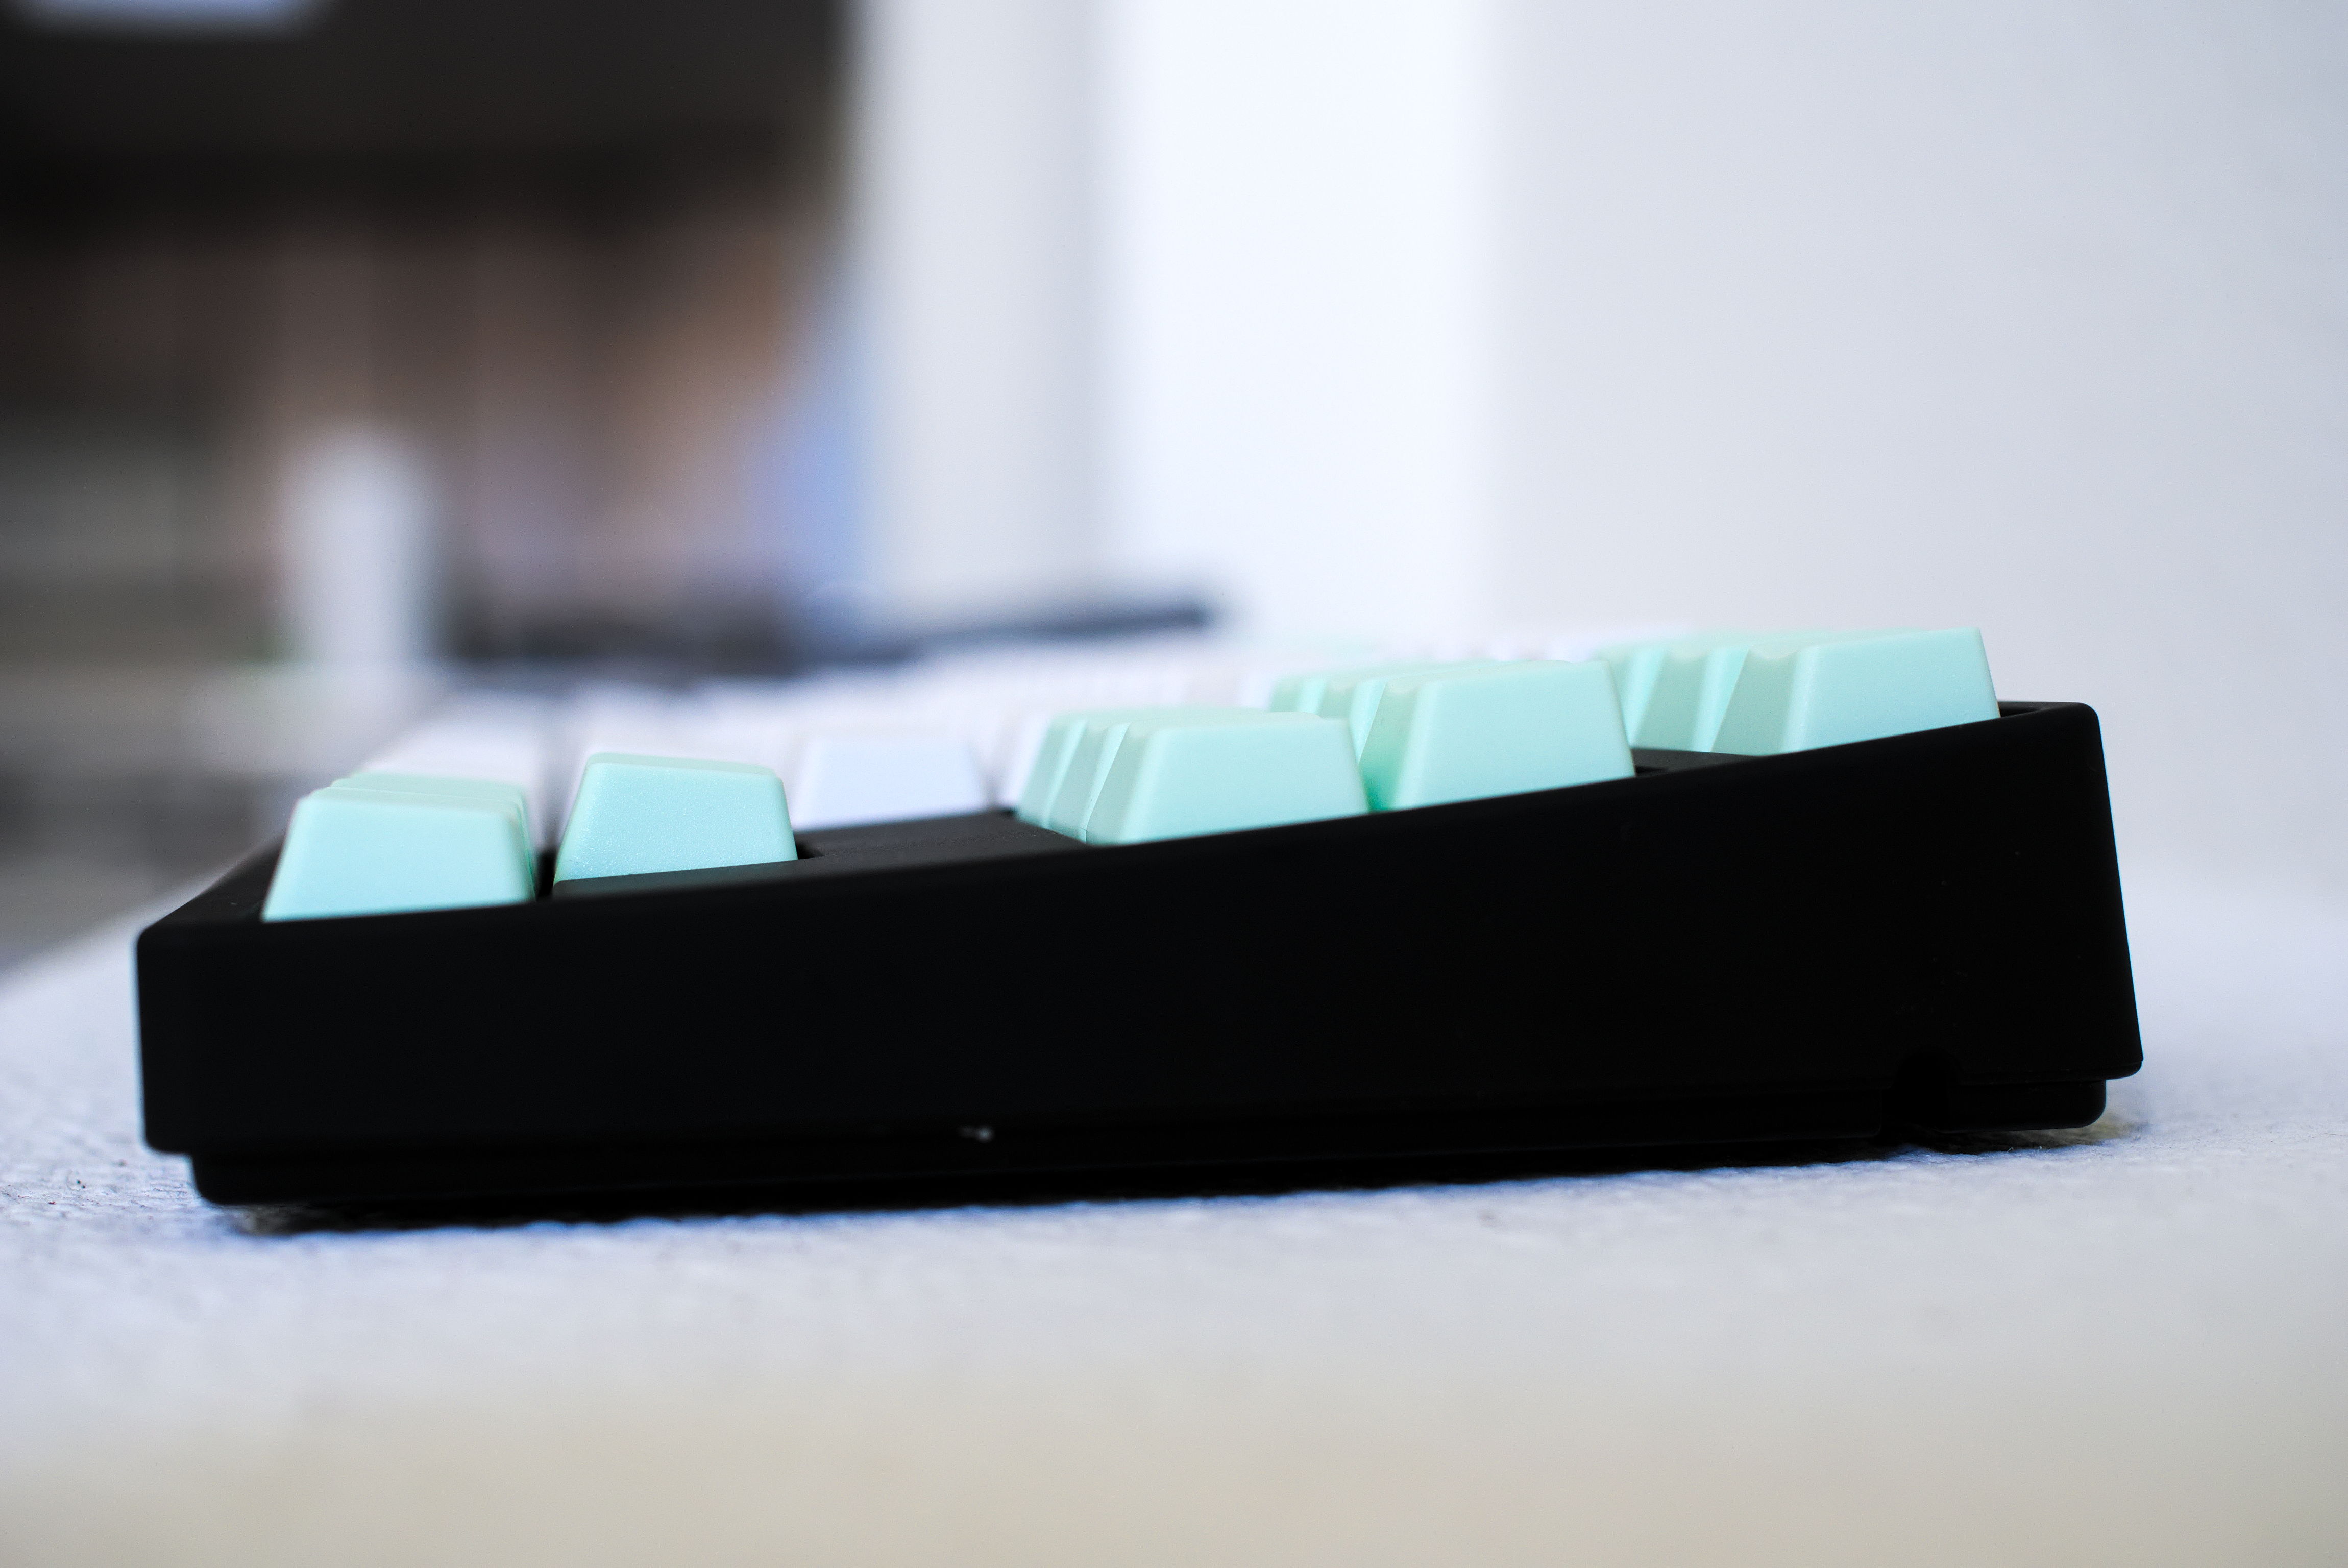 A very pleasing frame, really enjoy the way this keyboard looks.